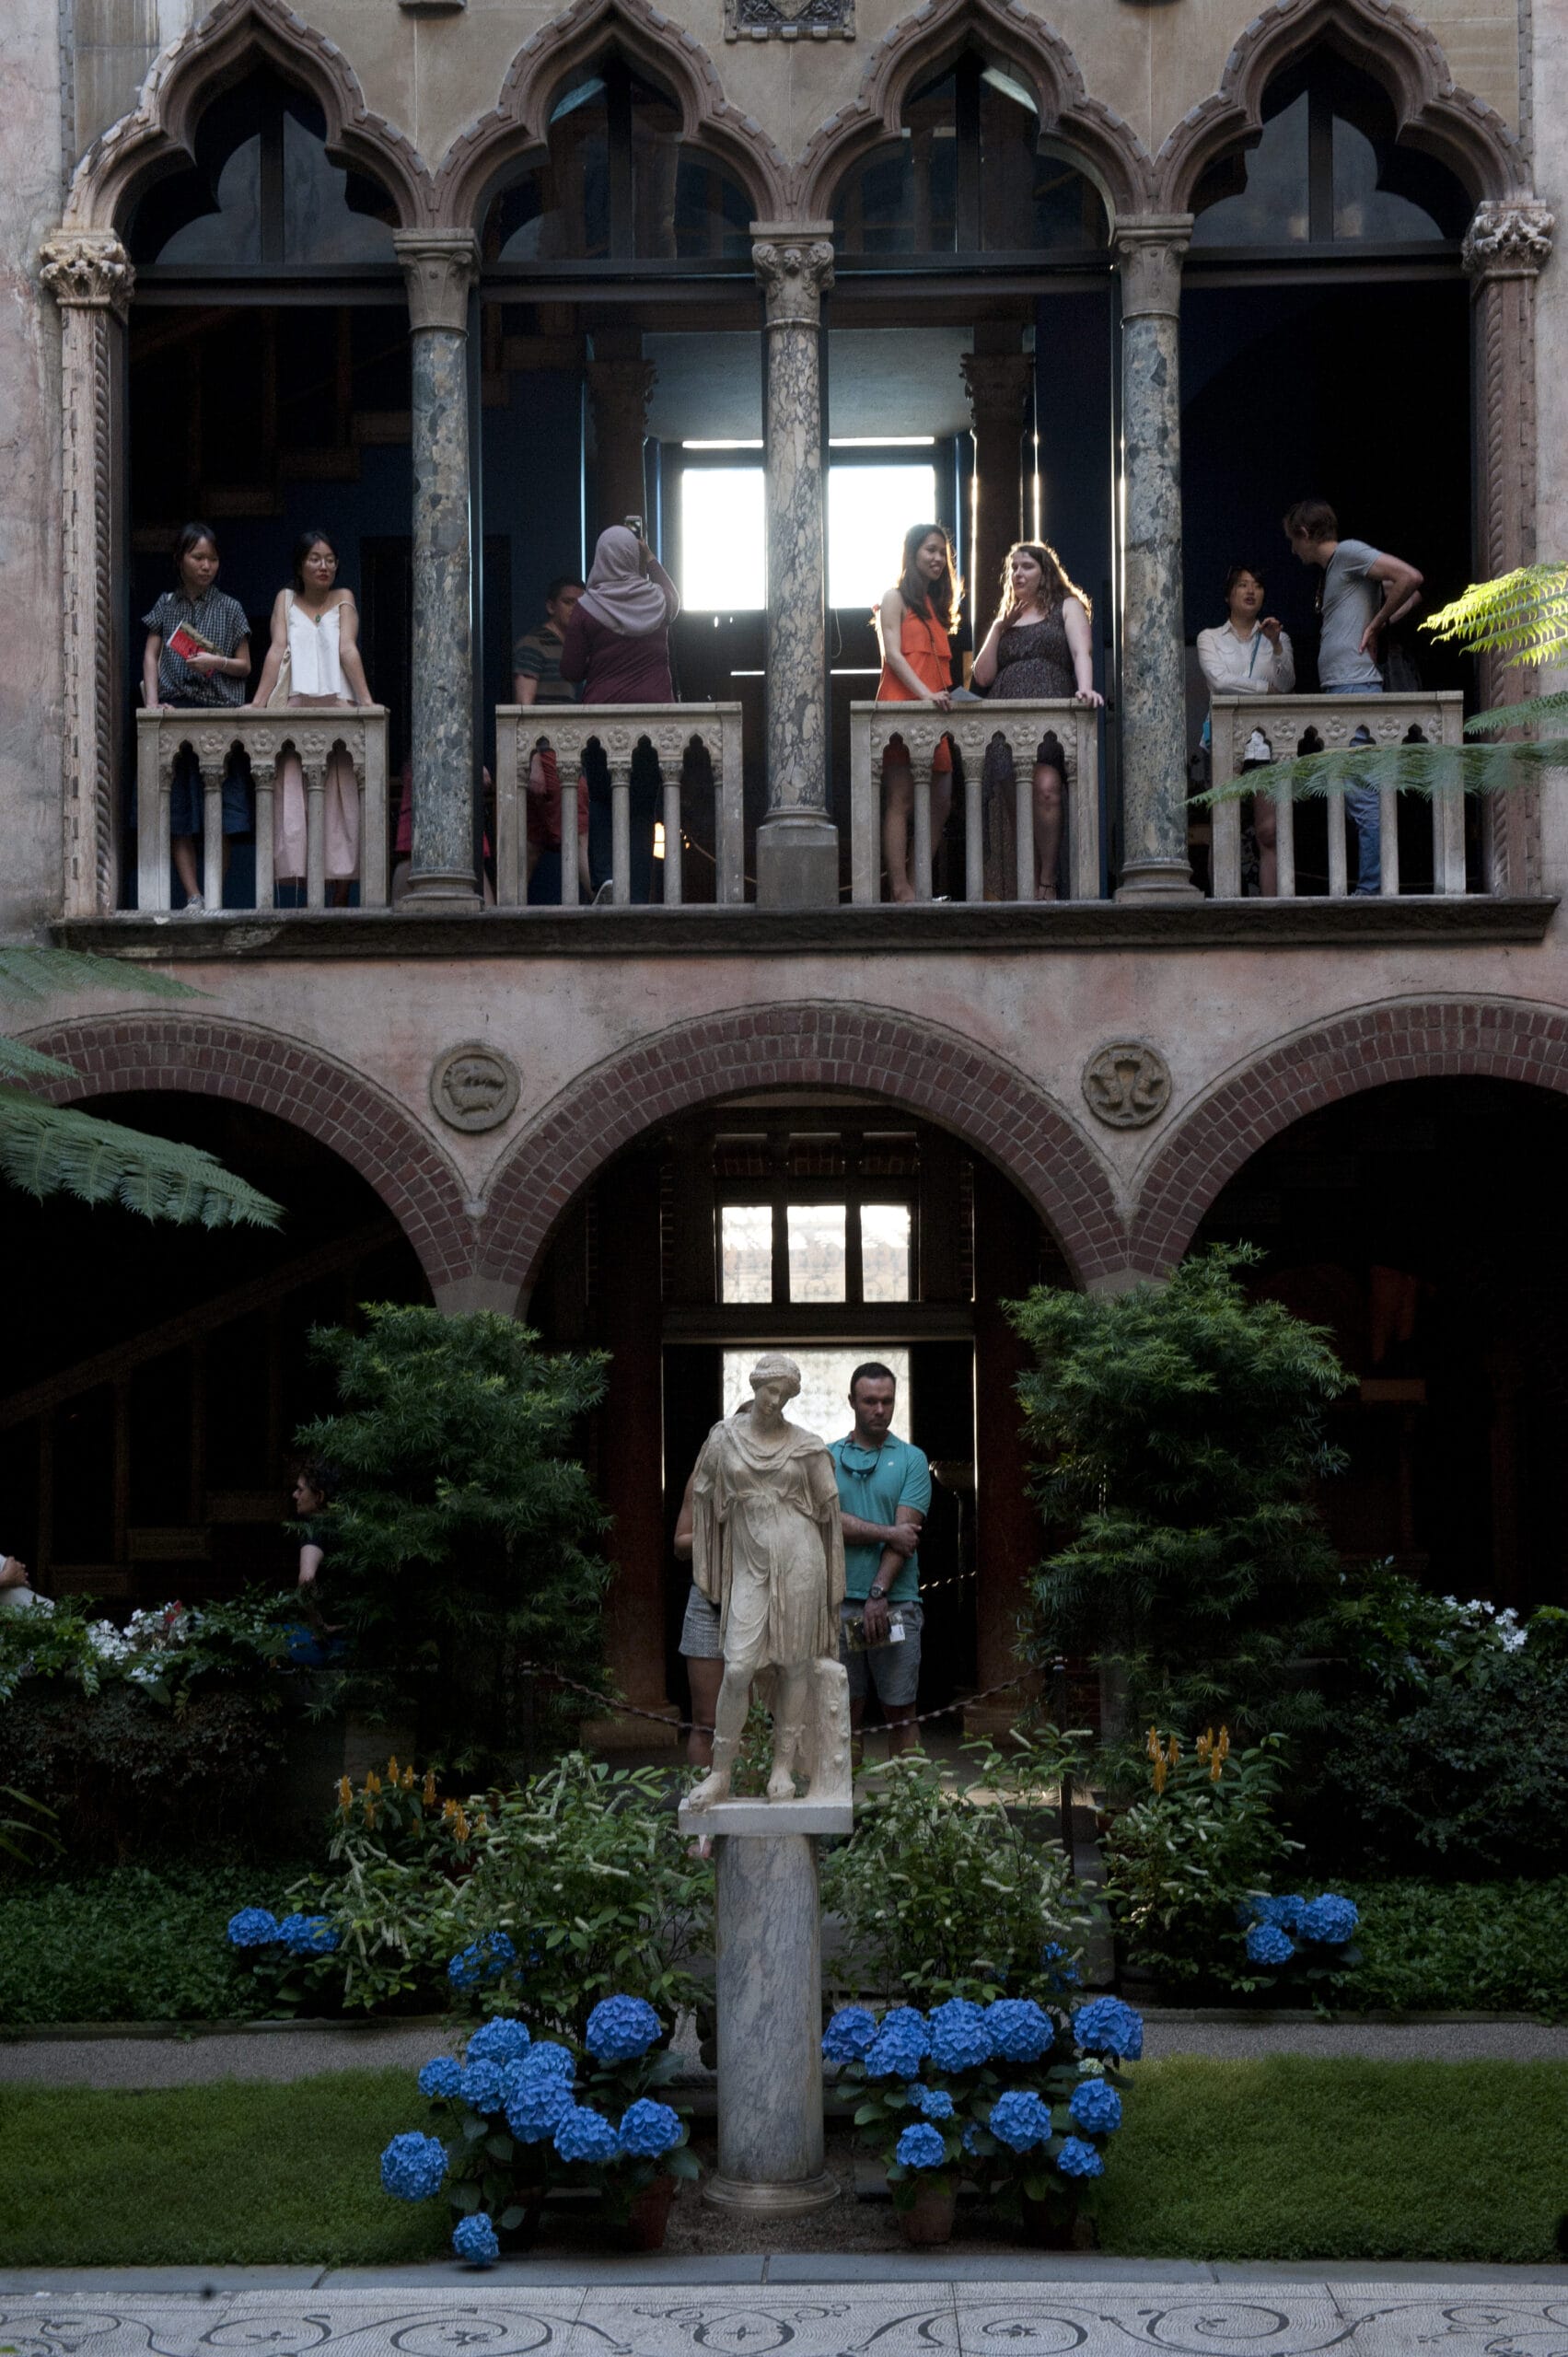 The courtyard of the Isabella Gardner Museum showing a statue at the bottom of the photo and a back-lit balcony with people gathered and talking looking down upon the courtyard.